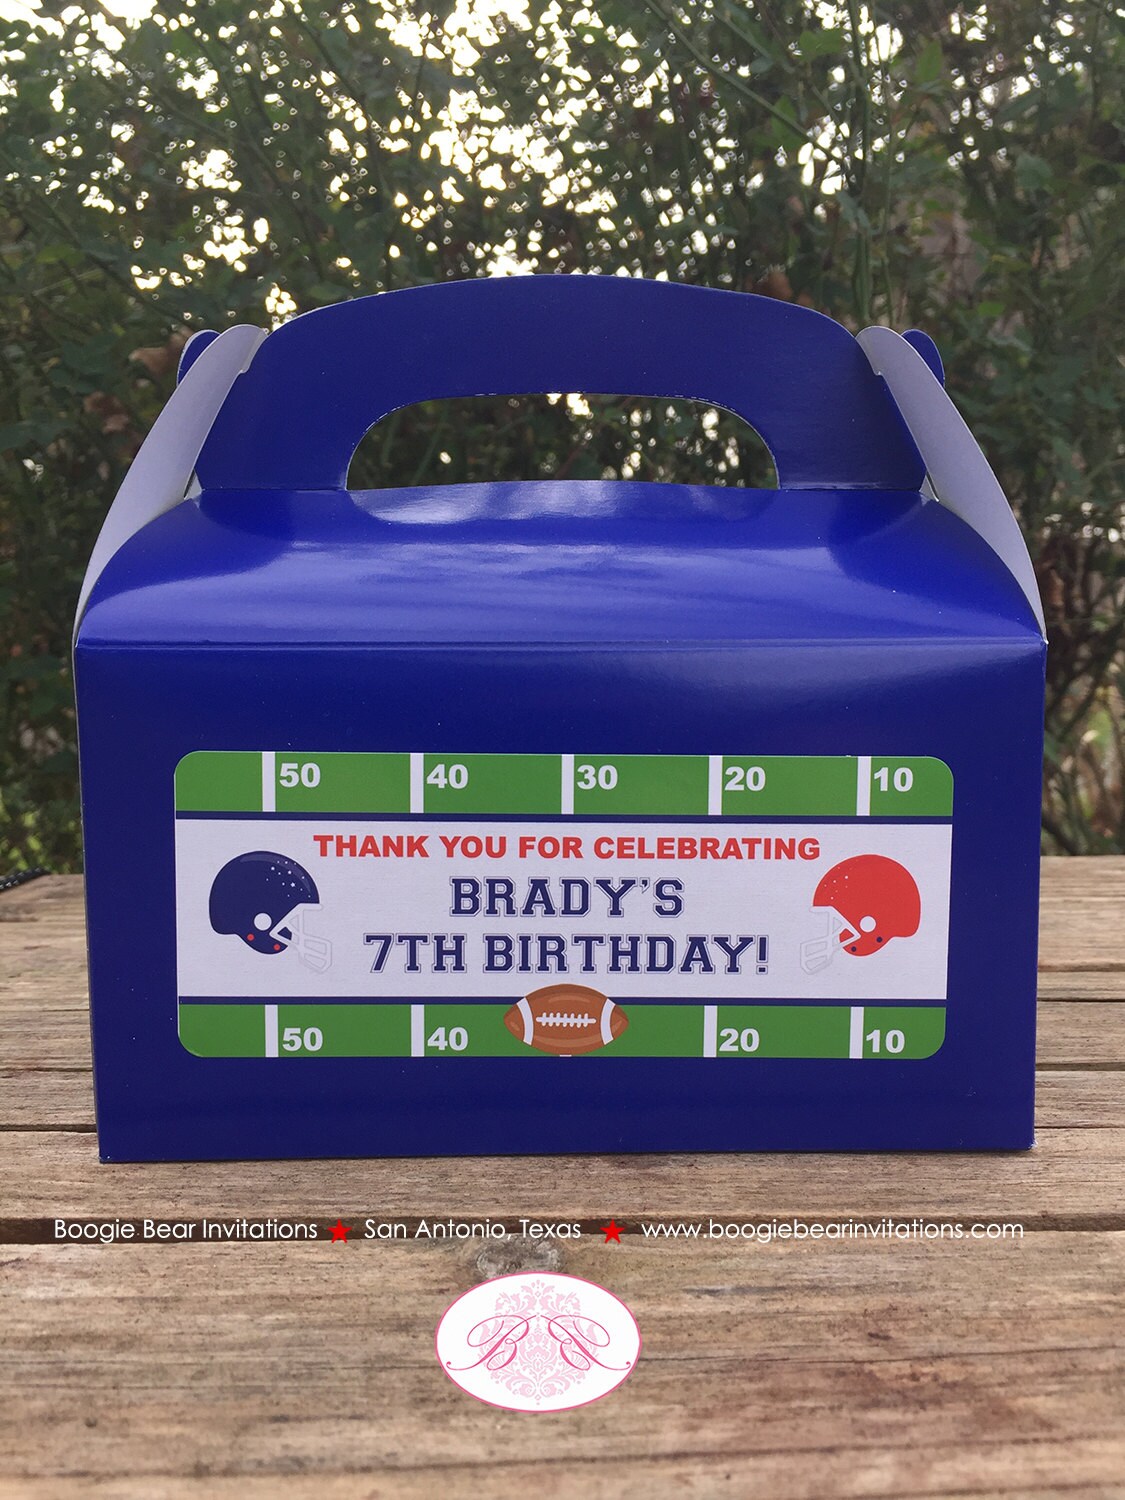 Football Birthday Party Treat Boxes Bag Red Blue Red Favor Touchdown Foot Ball Athletic Game Box Boogie Bear Invitations Brady Theme Printed